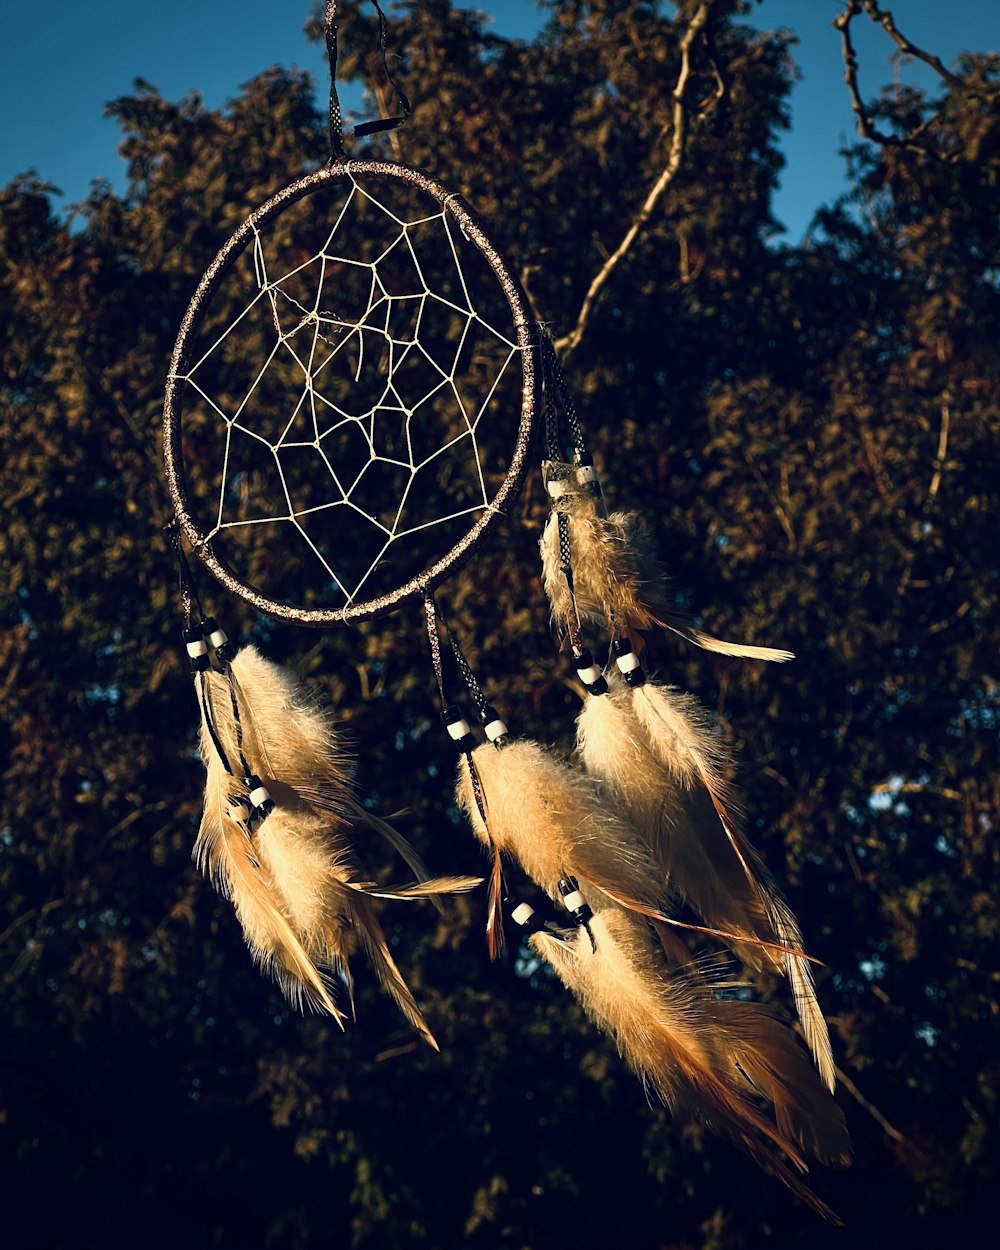 a close up of a dream catcher hanging from a tree